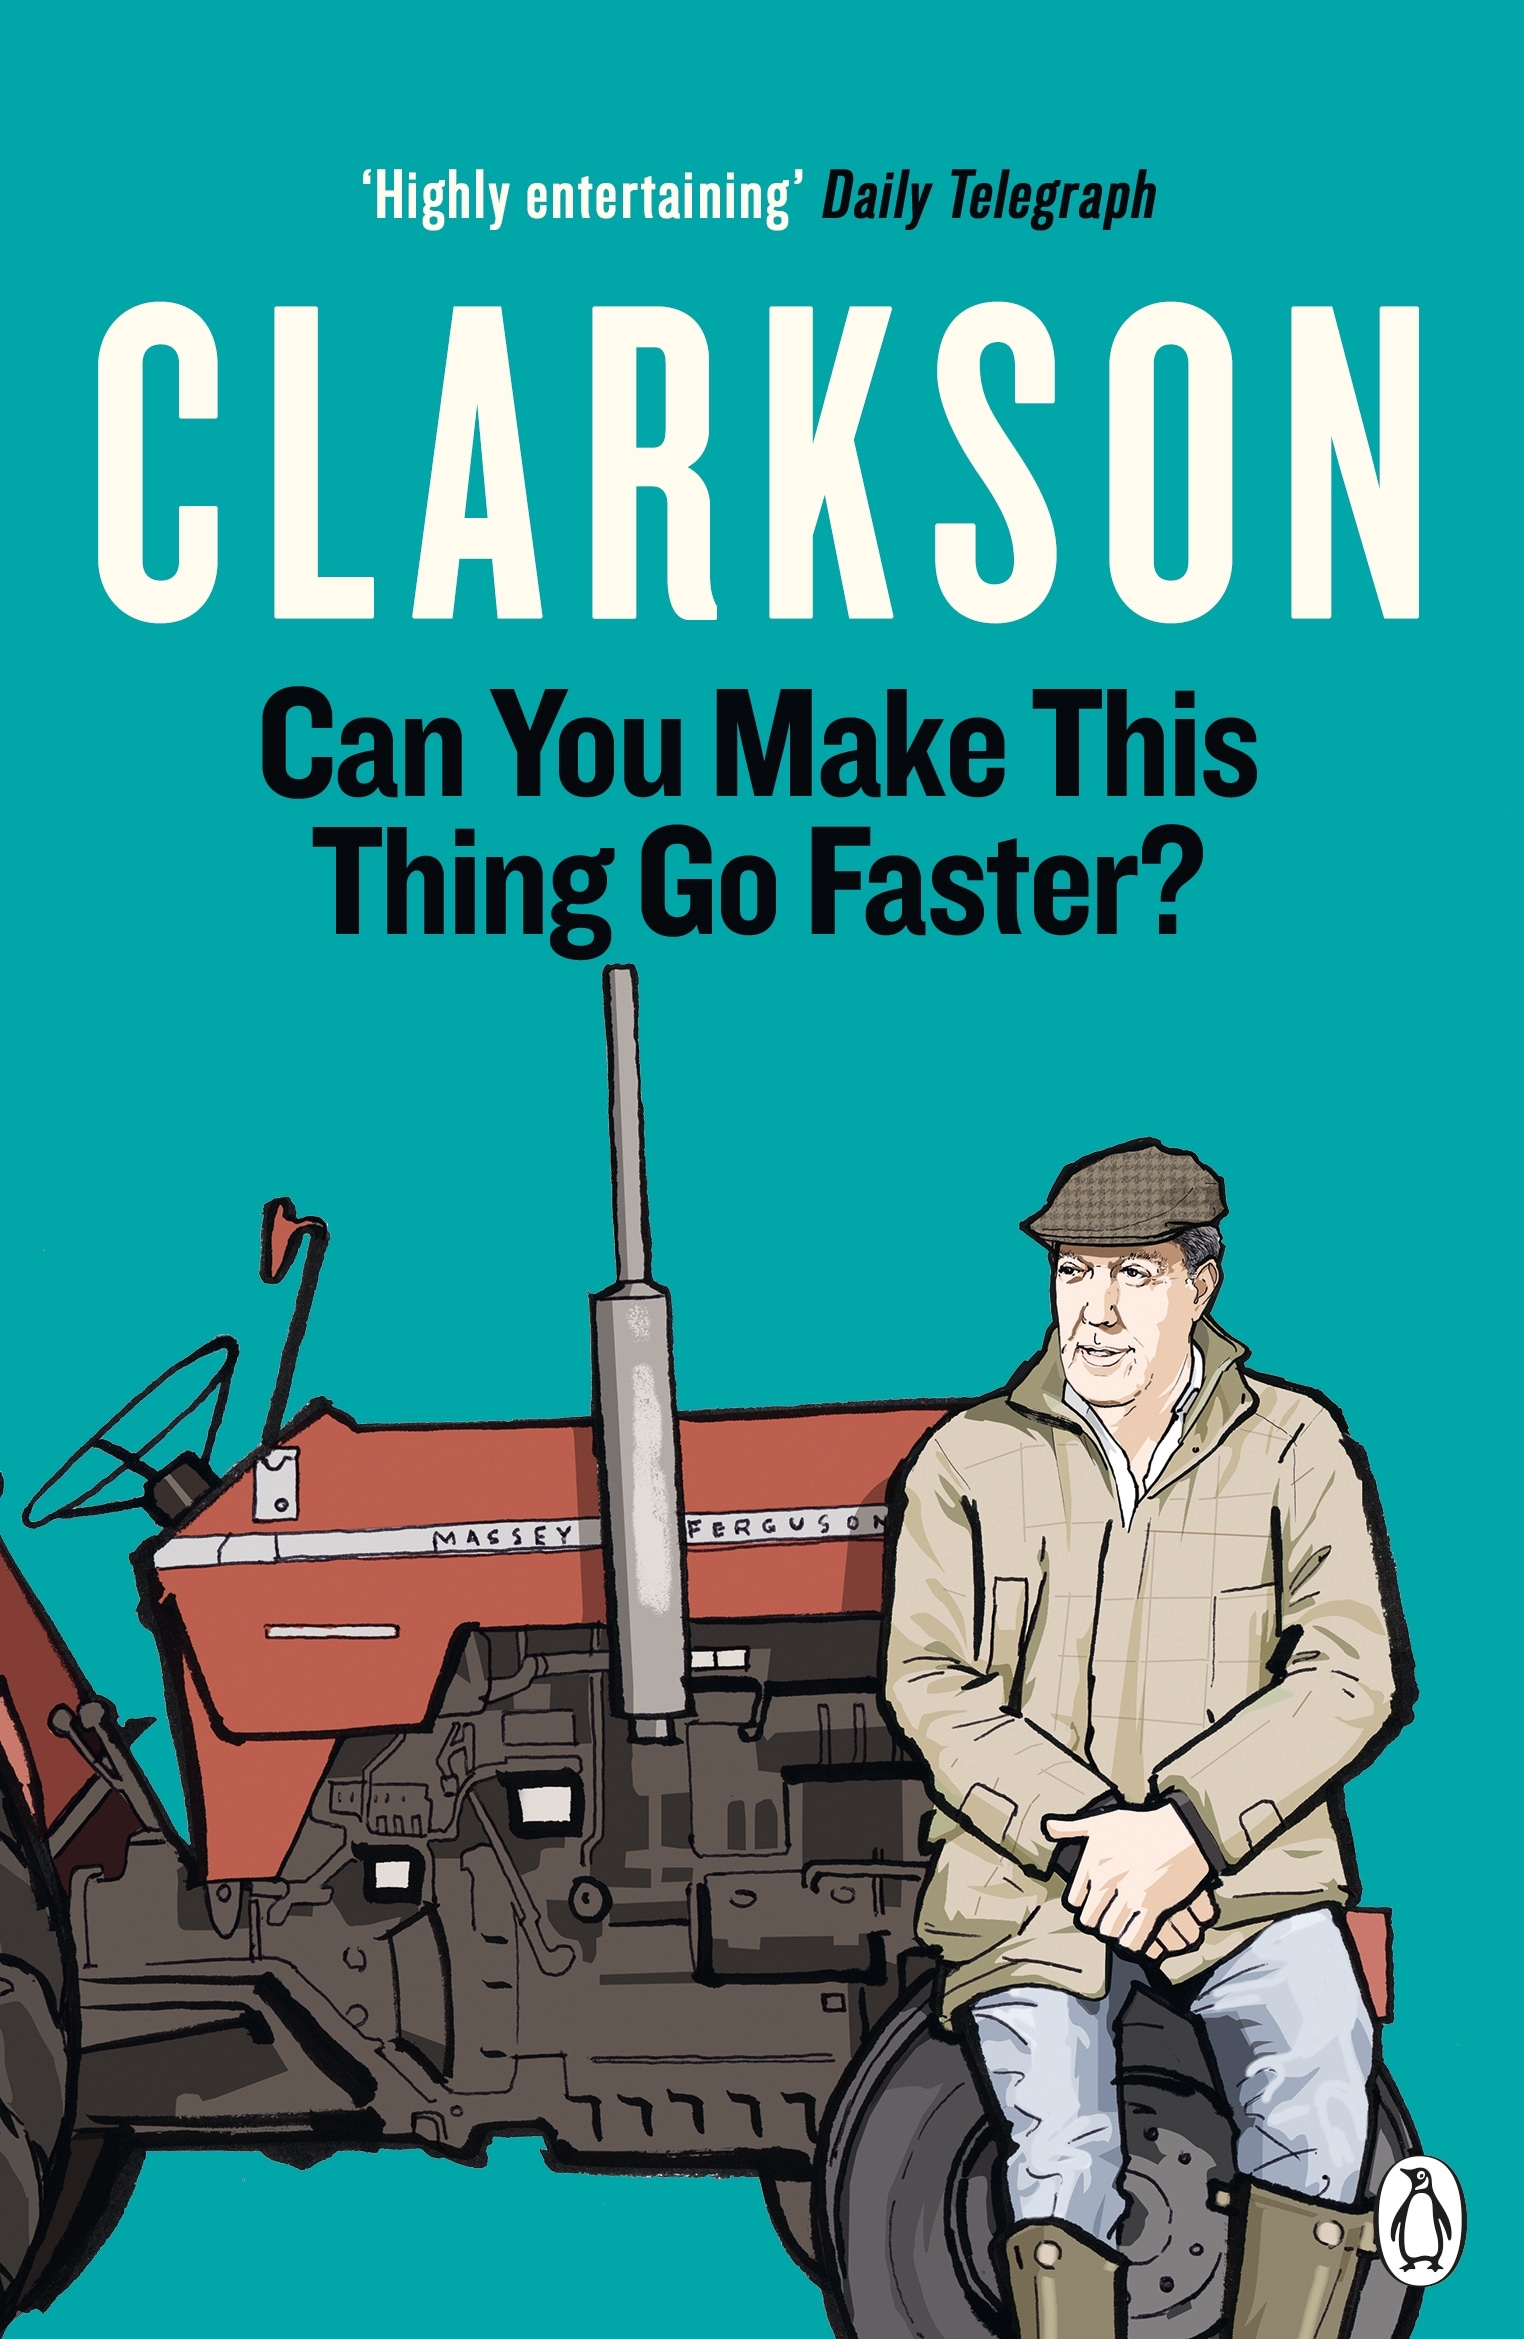 Book “Can You Make This Thing Go Faster?” by Jeremy Clarkson — May 13, 2021